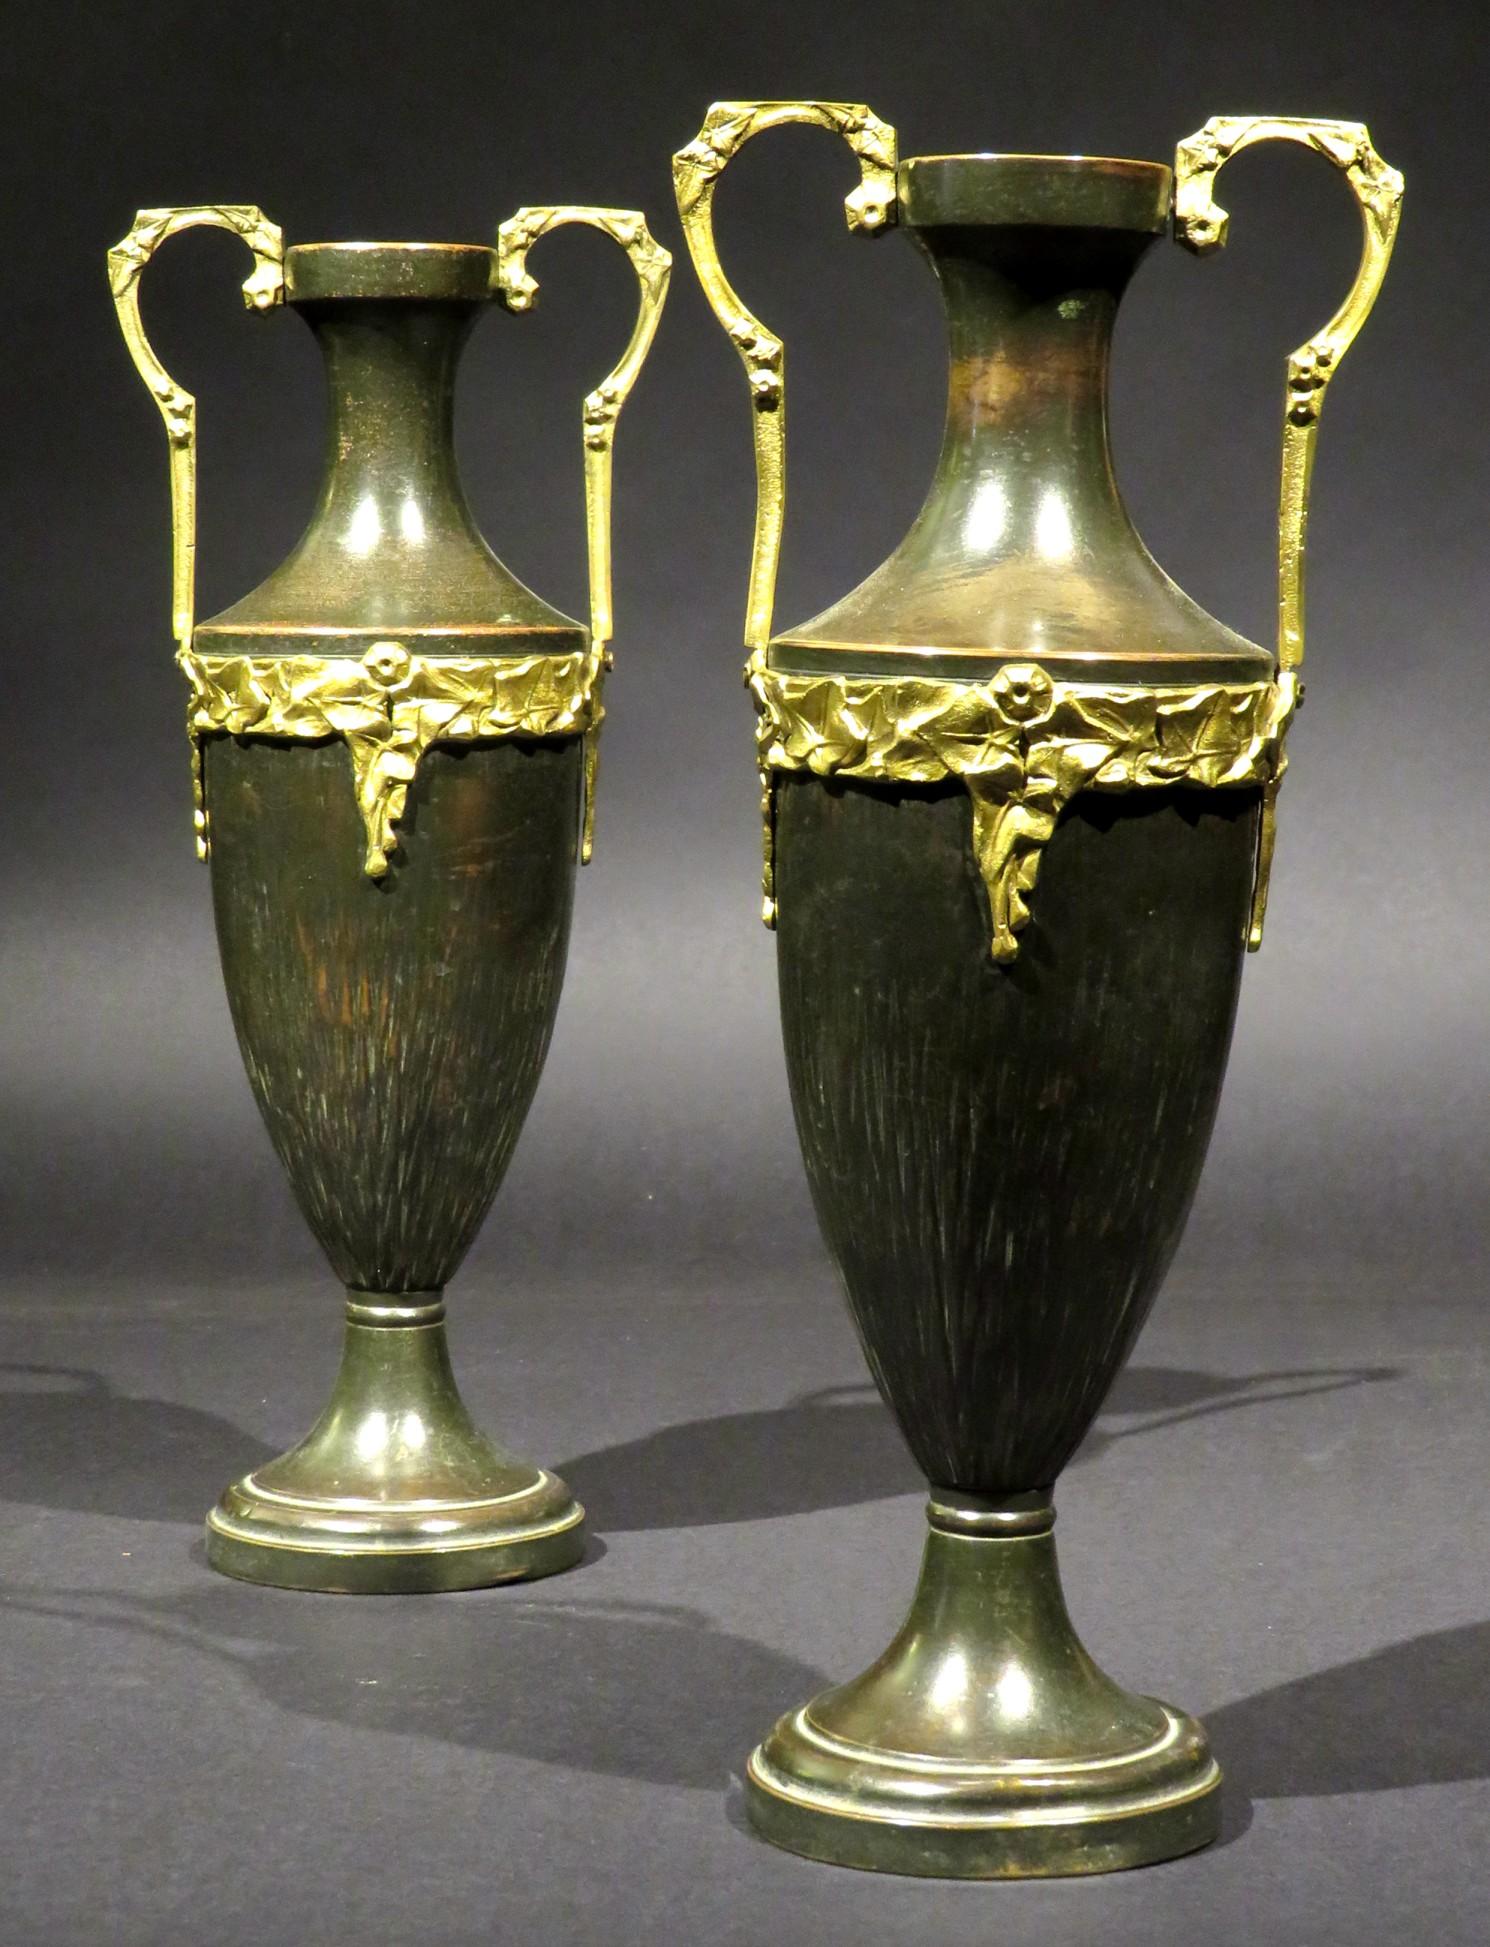 A very attractive pair of bronze patinated copper urns in the Neoclassical taste. 
Both ovoid shaped bodies showing embossed organic linear motifs, rising up to ormolu mounts & kylix handles, raised overall upon stepped circular bases. Unmarked but